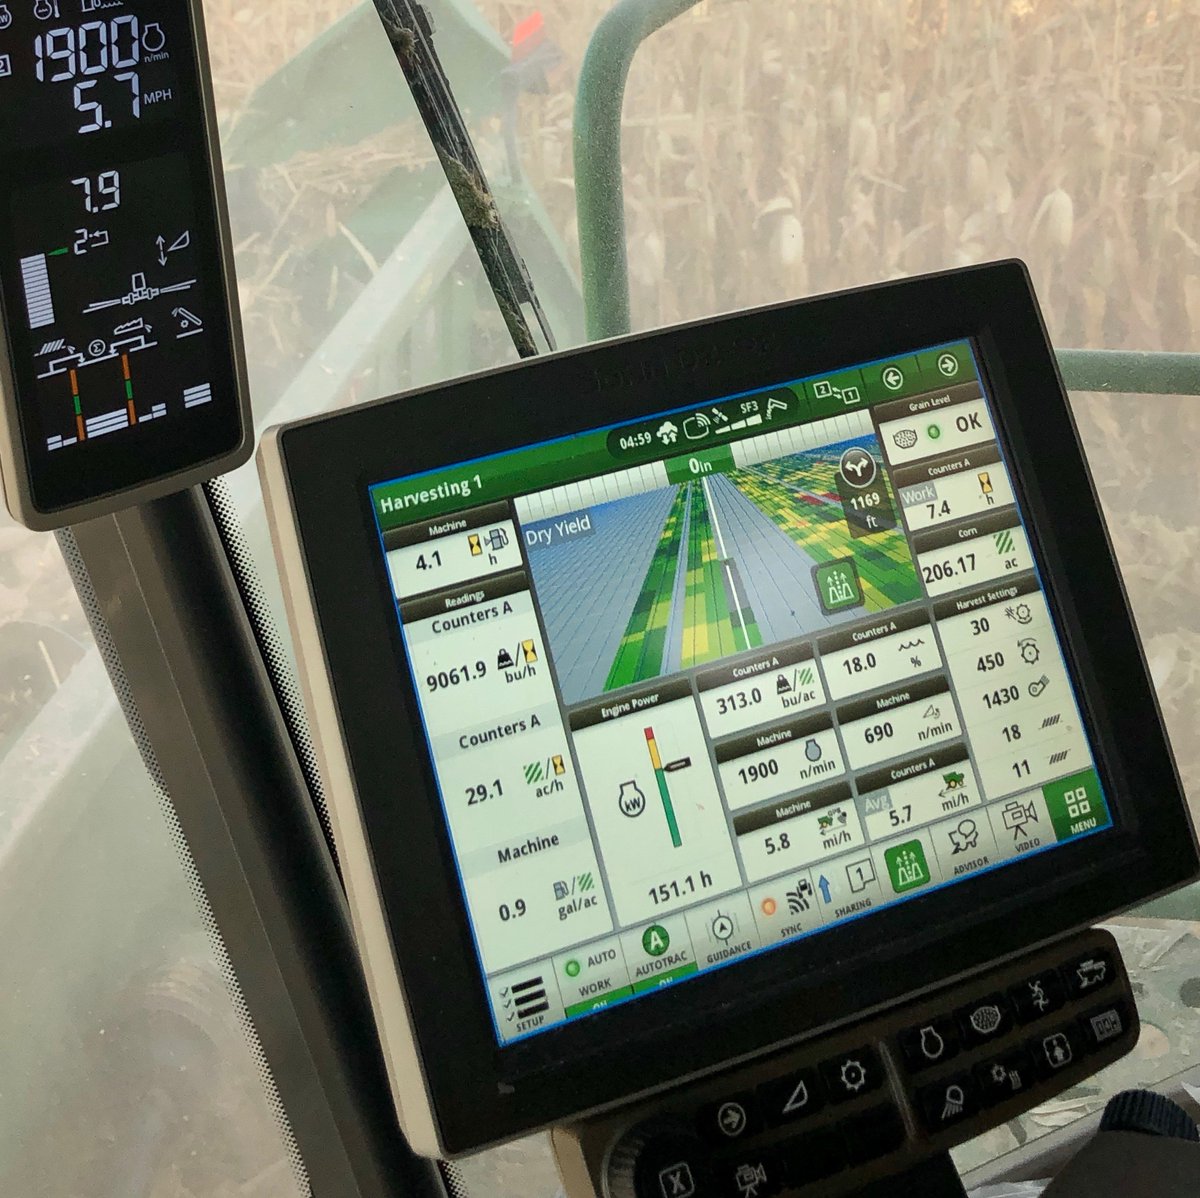  Combine Advisor - Auto Maintain AutoTrac Rowsense Machine Sync with an  #8RX 410 tractor and  @UnverferthMfg Brent grain cart  @JohnDeere Operation Center Gen 4 4600 Displays #LandMarkDifference